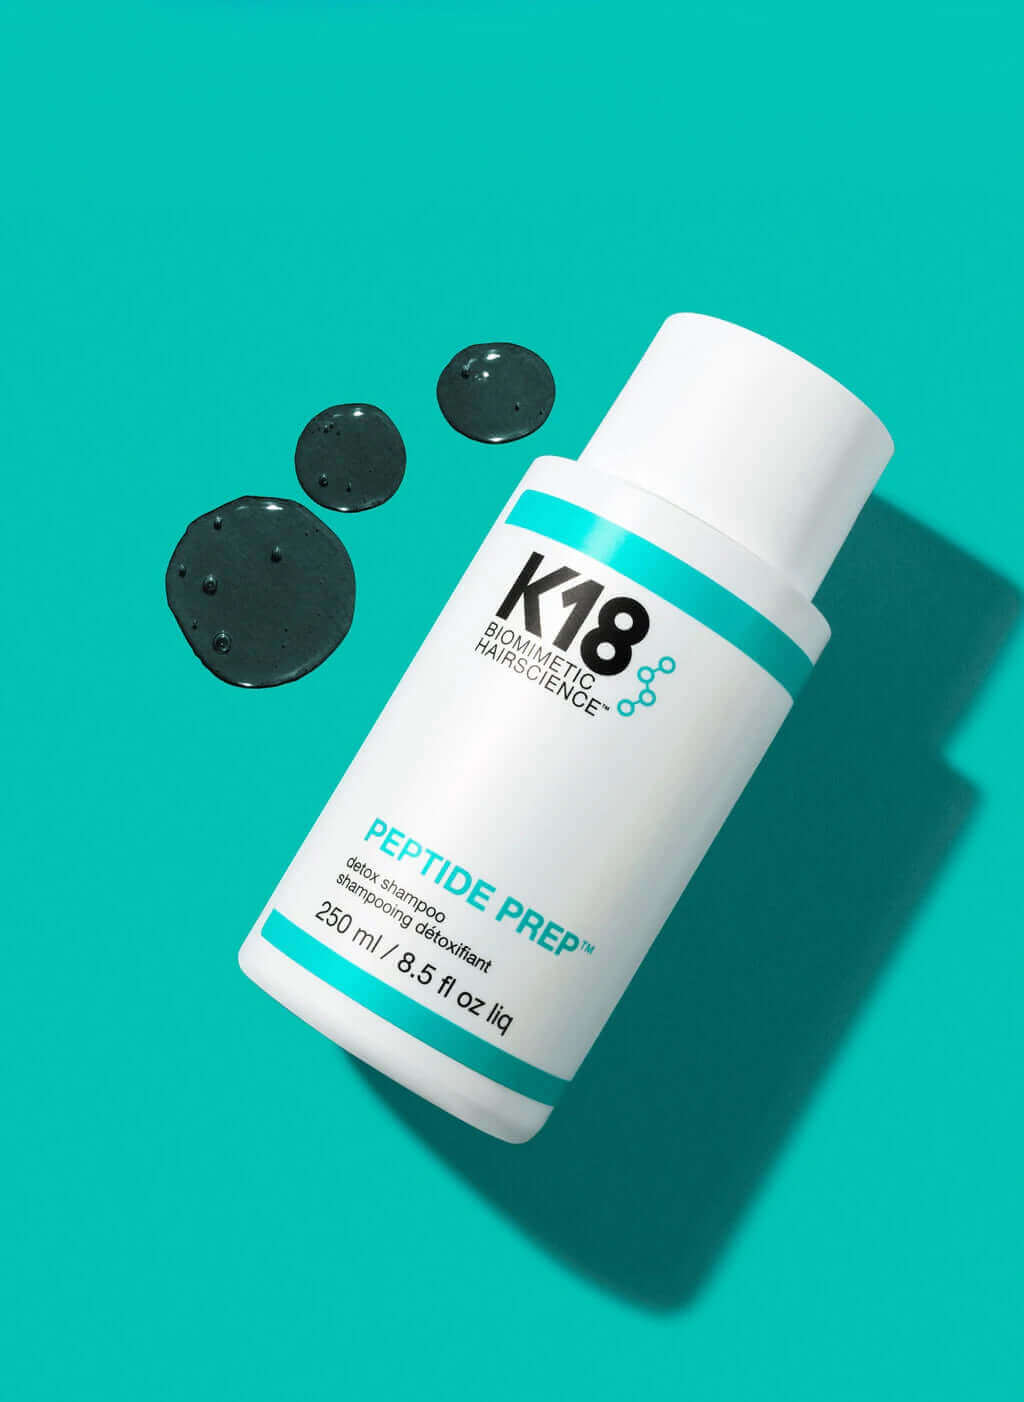 A bottle of K18 Hair Repair's K18 PEPTIDE PREP Detox Shampoo on a turquoise background.